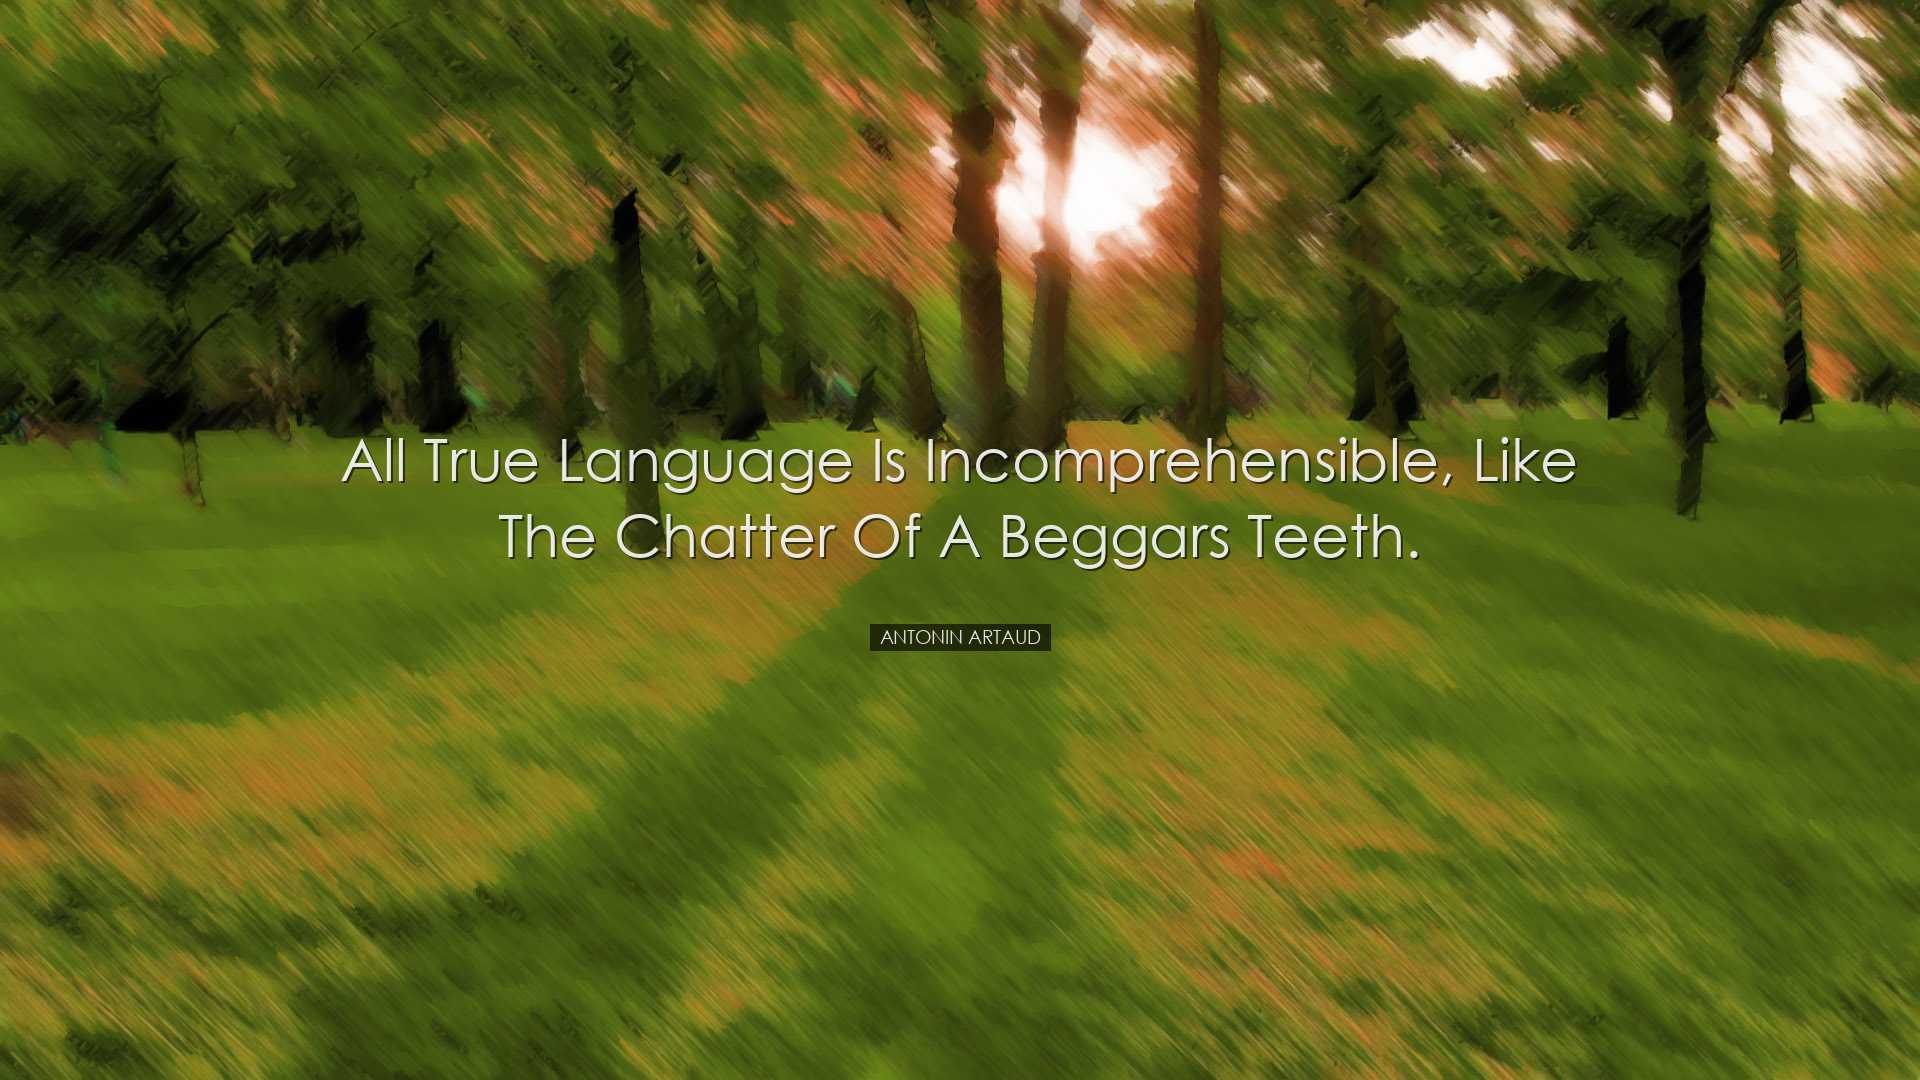 All true language is incomprehensible, like the chatter of a begga